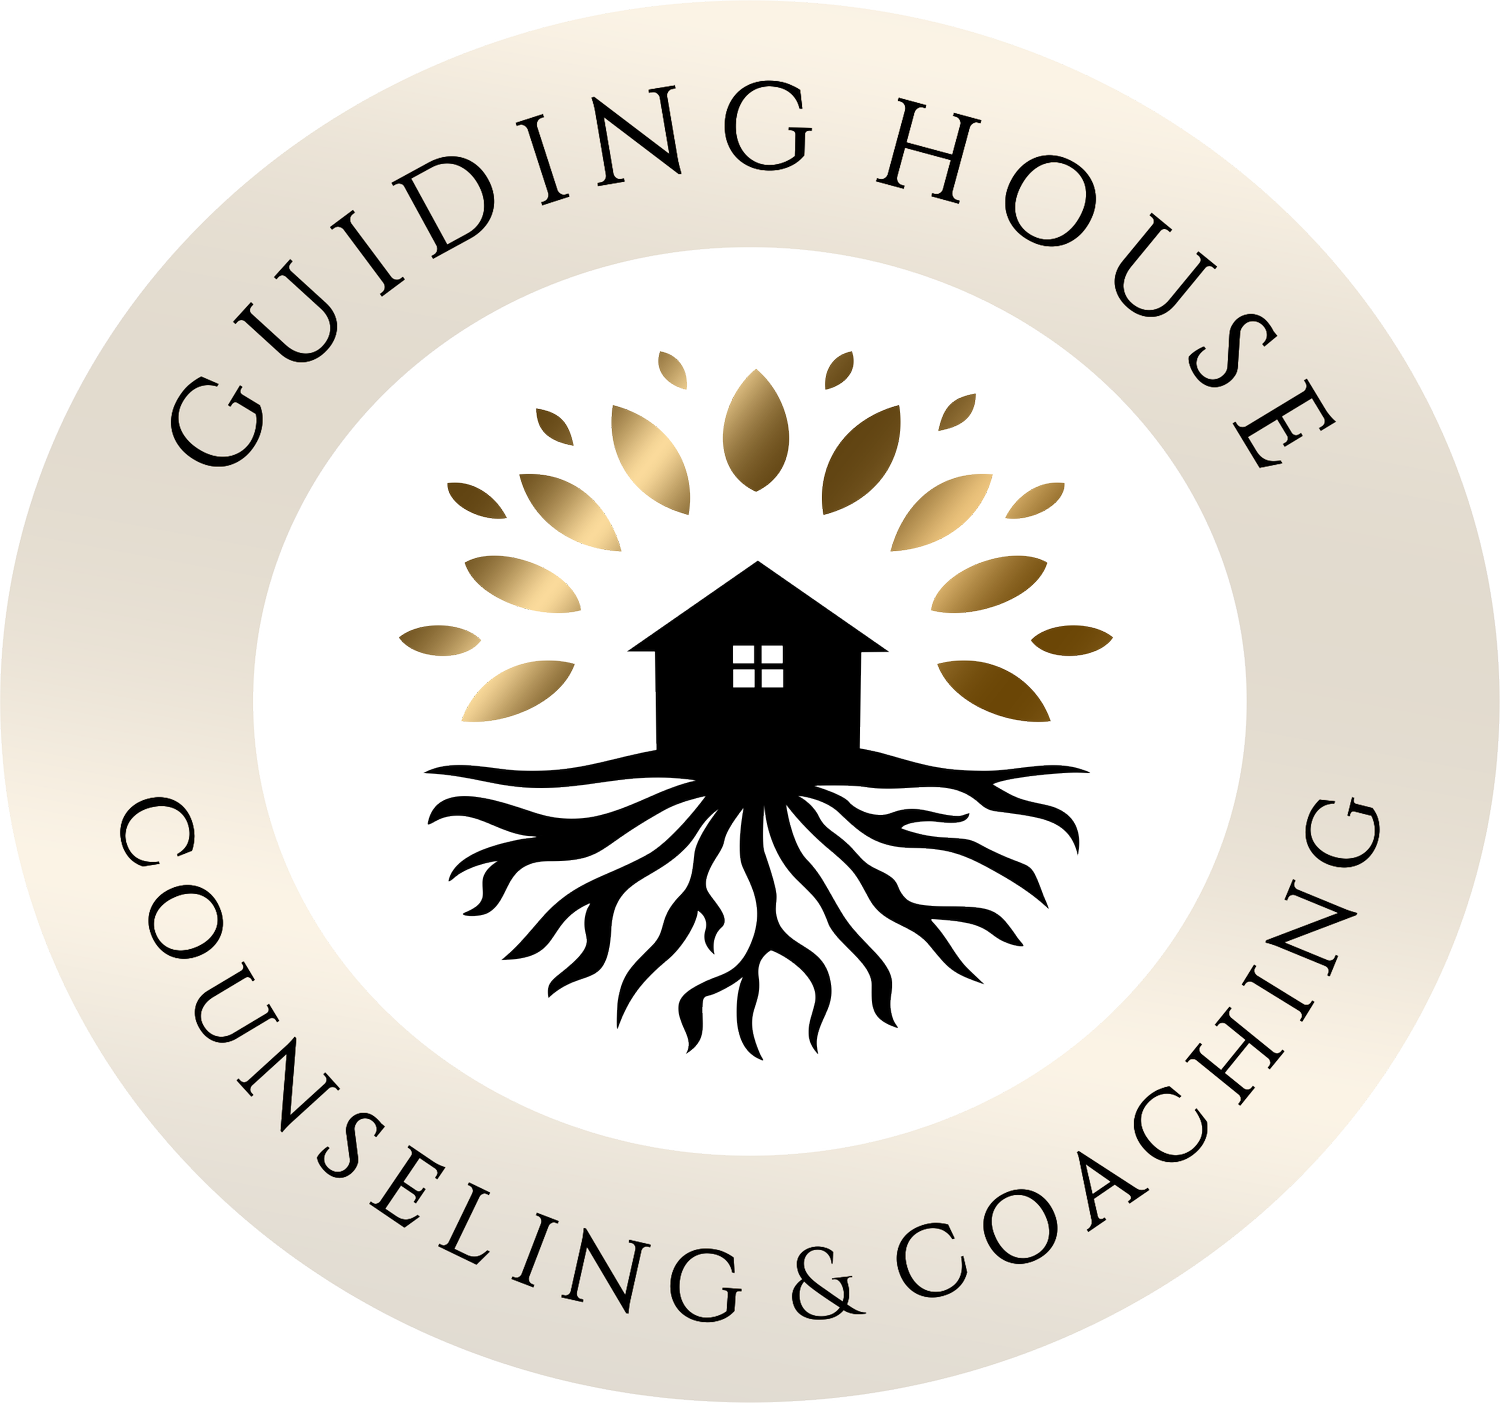 Guiding House Counseling Jackson Township